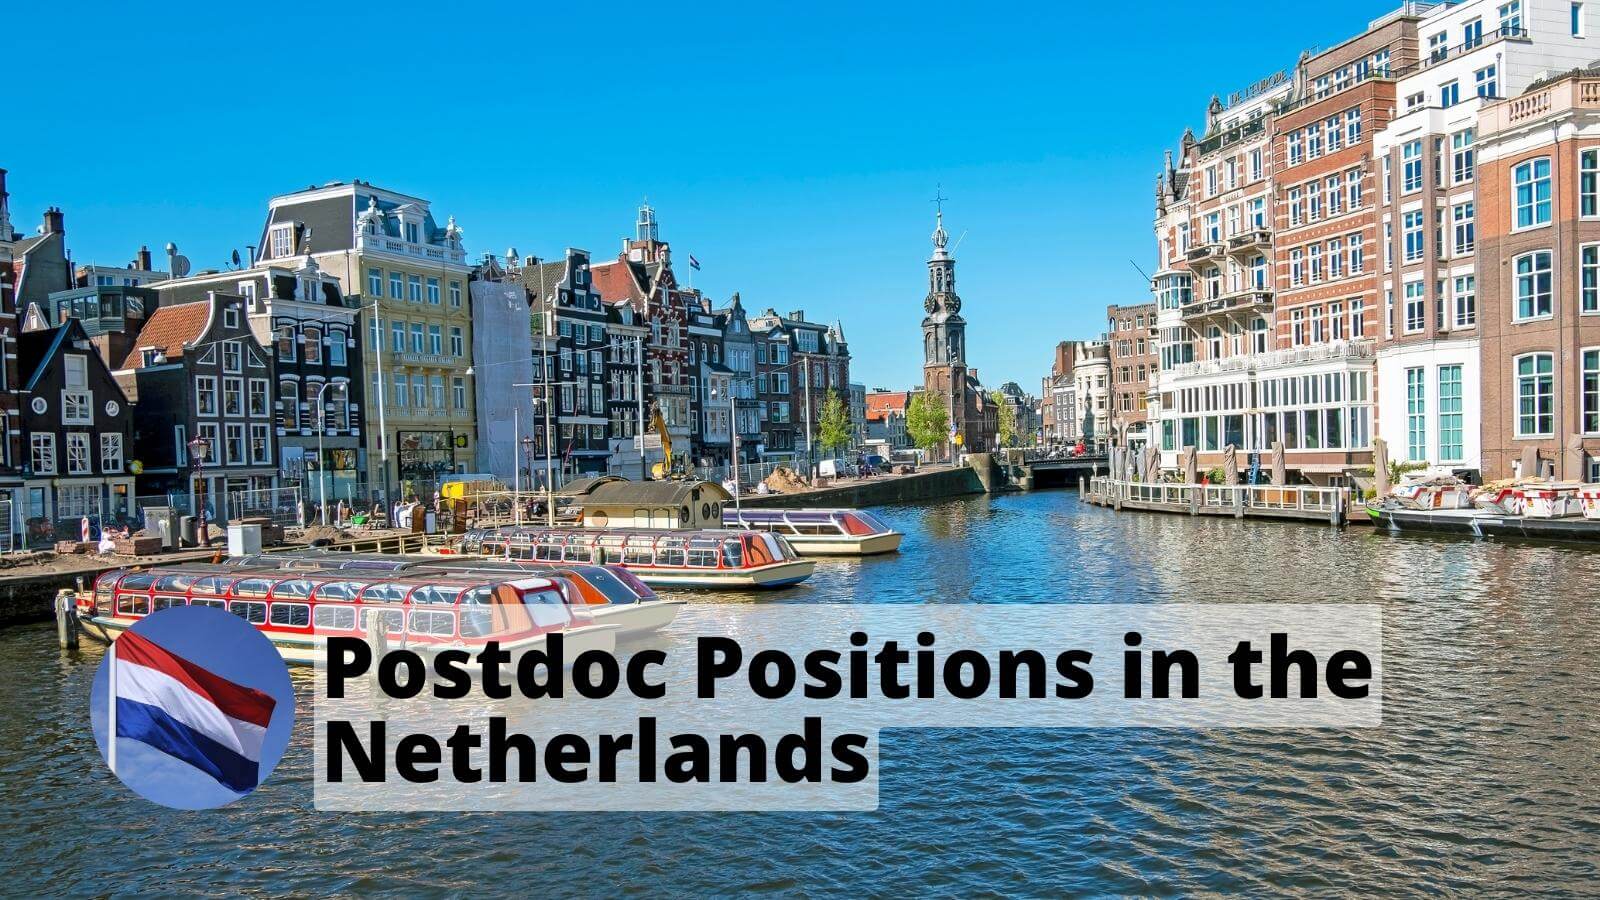 Postdoc Positions in the Netherlands